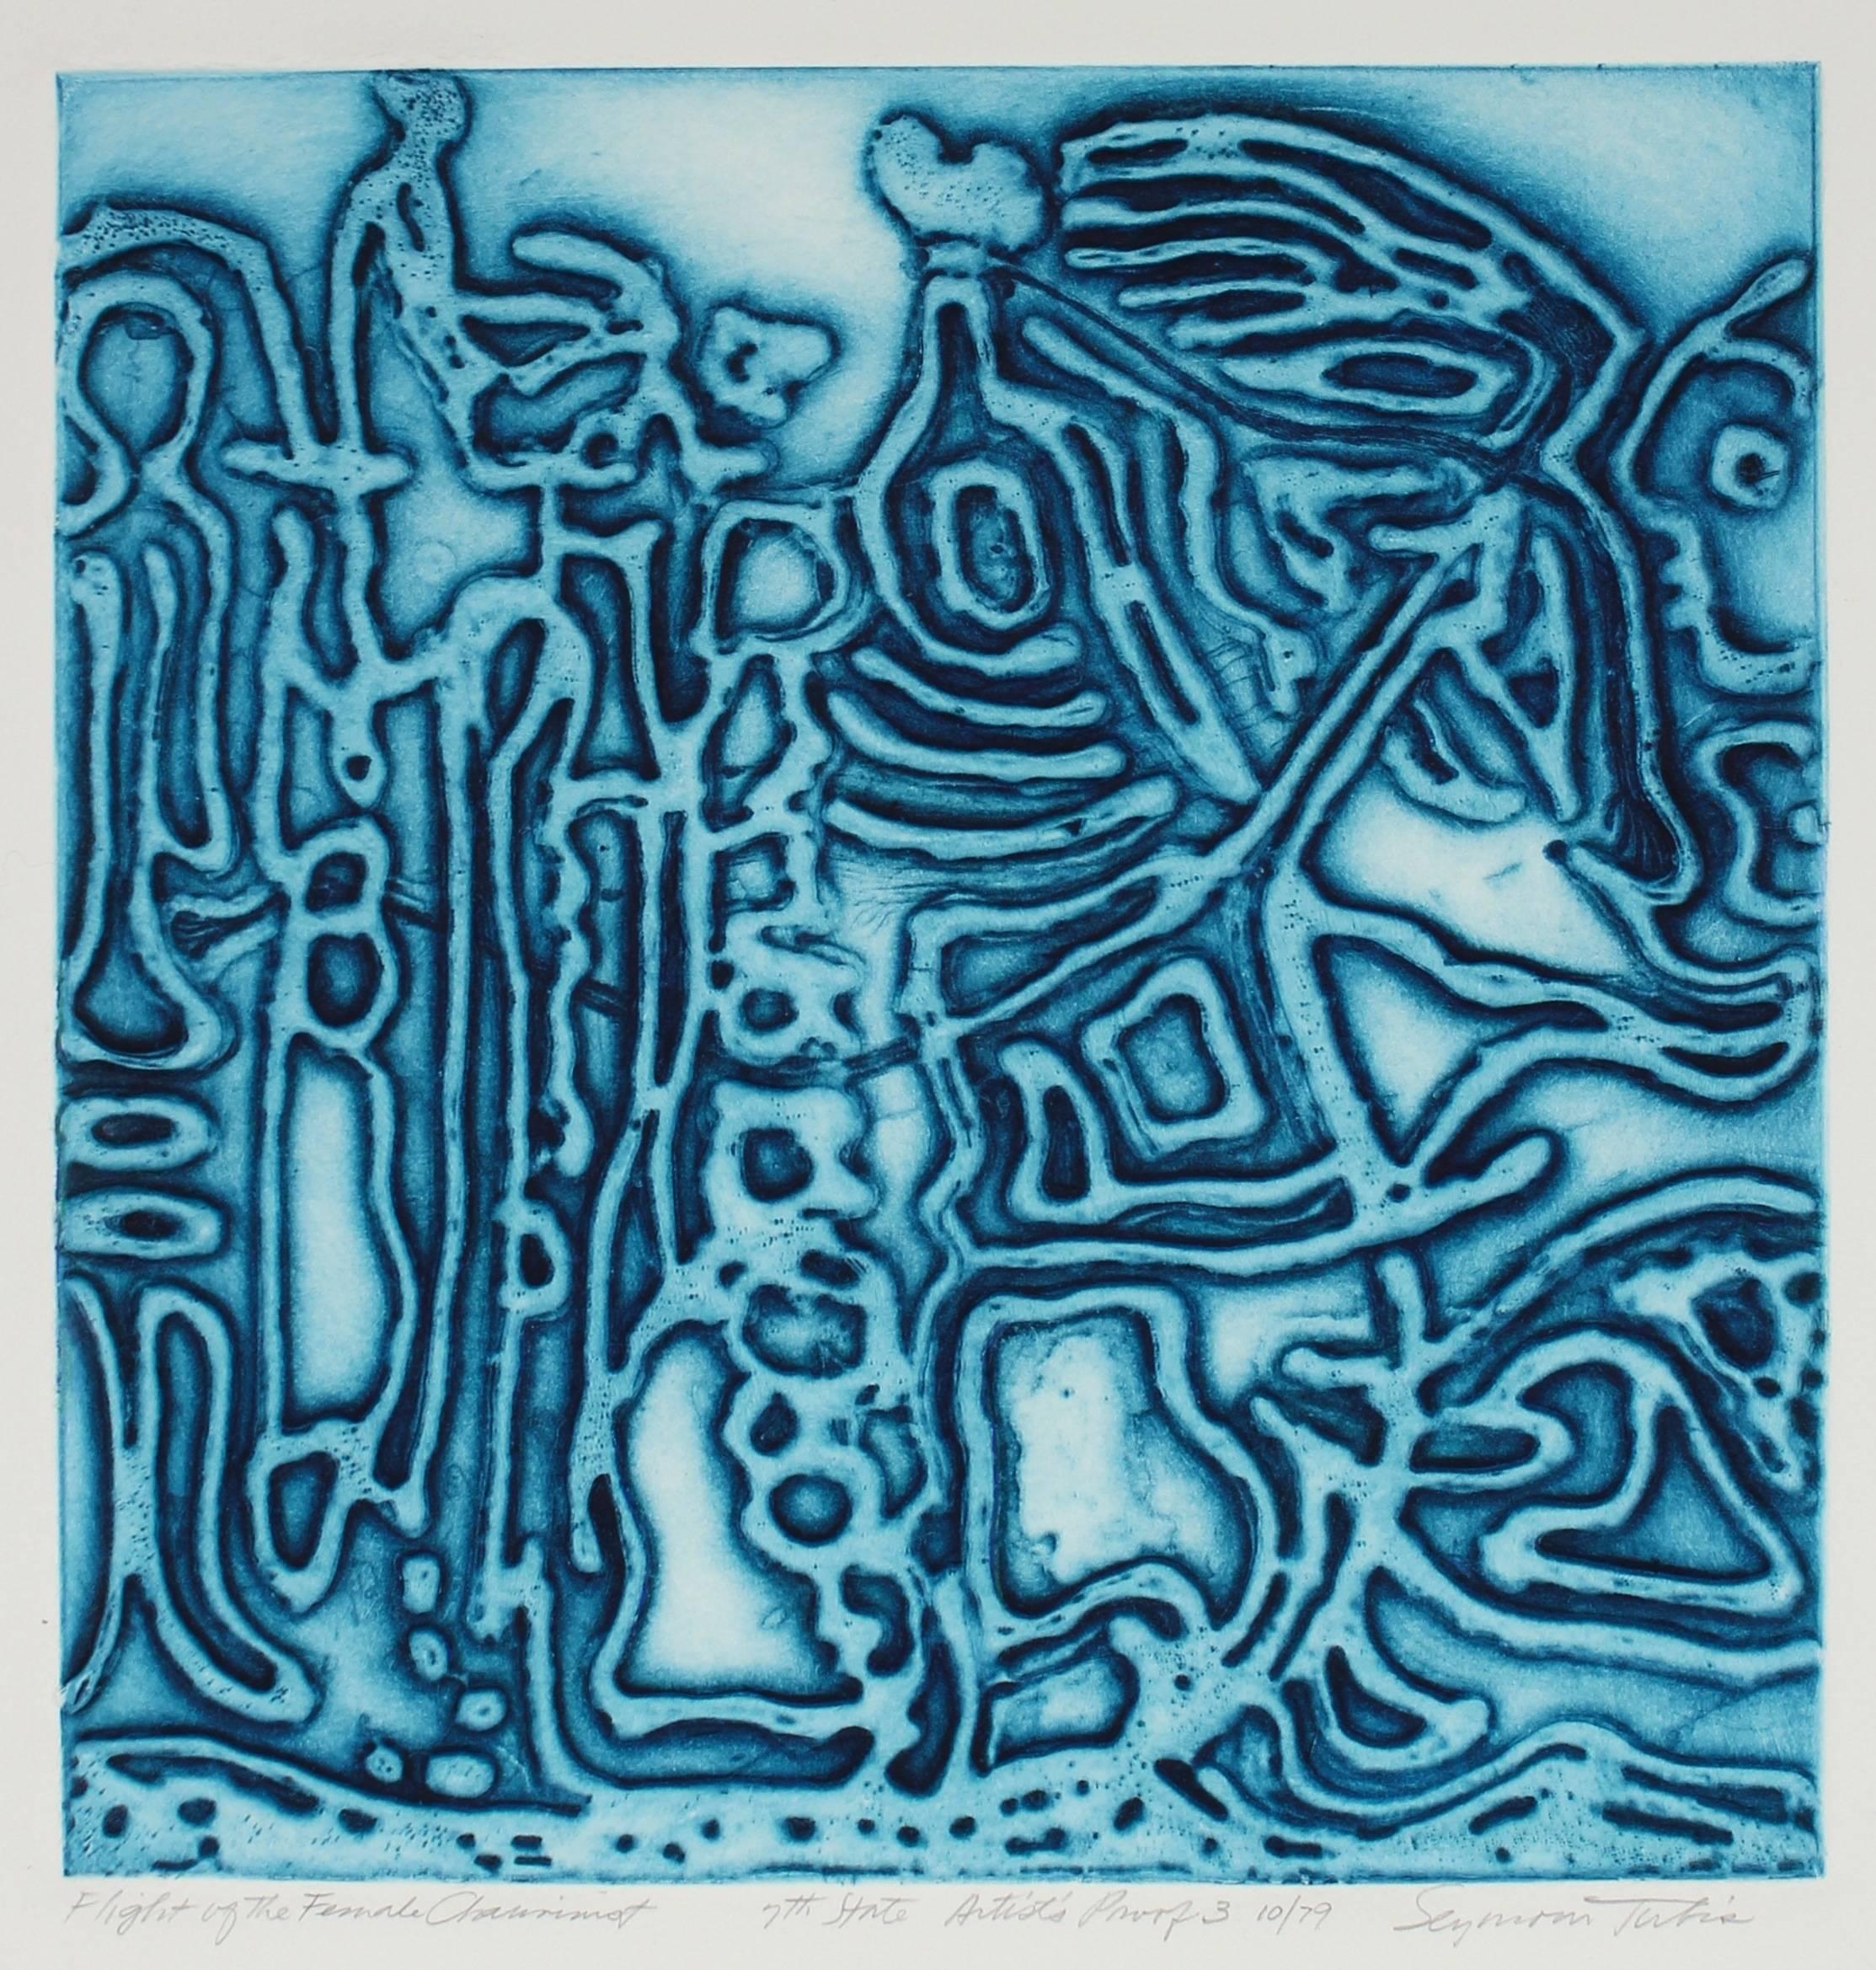 Seymour Tubis Abstract Print - "Flight of the Female Chauvinist" Textured Collograph Print in Blue